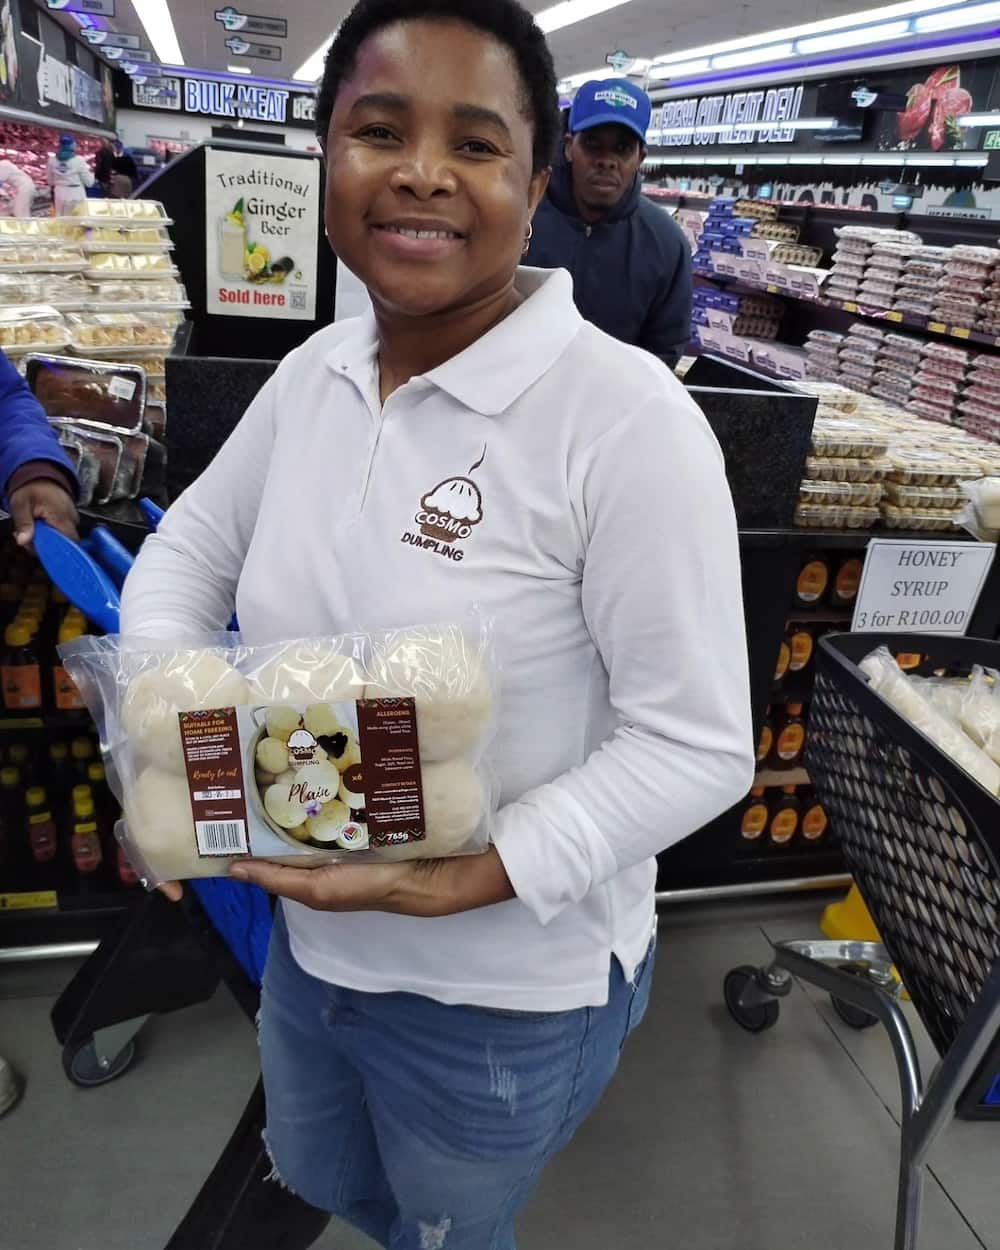 Customers in Gauteng love the products made from Cosmo Dumpling.